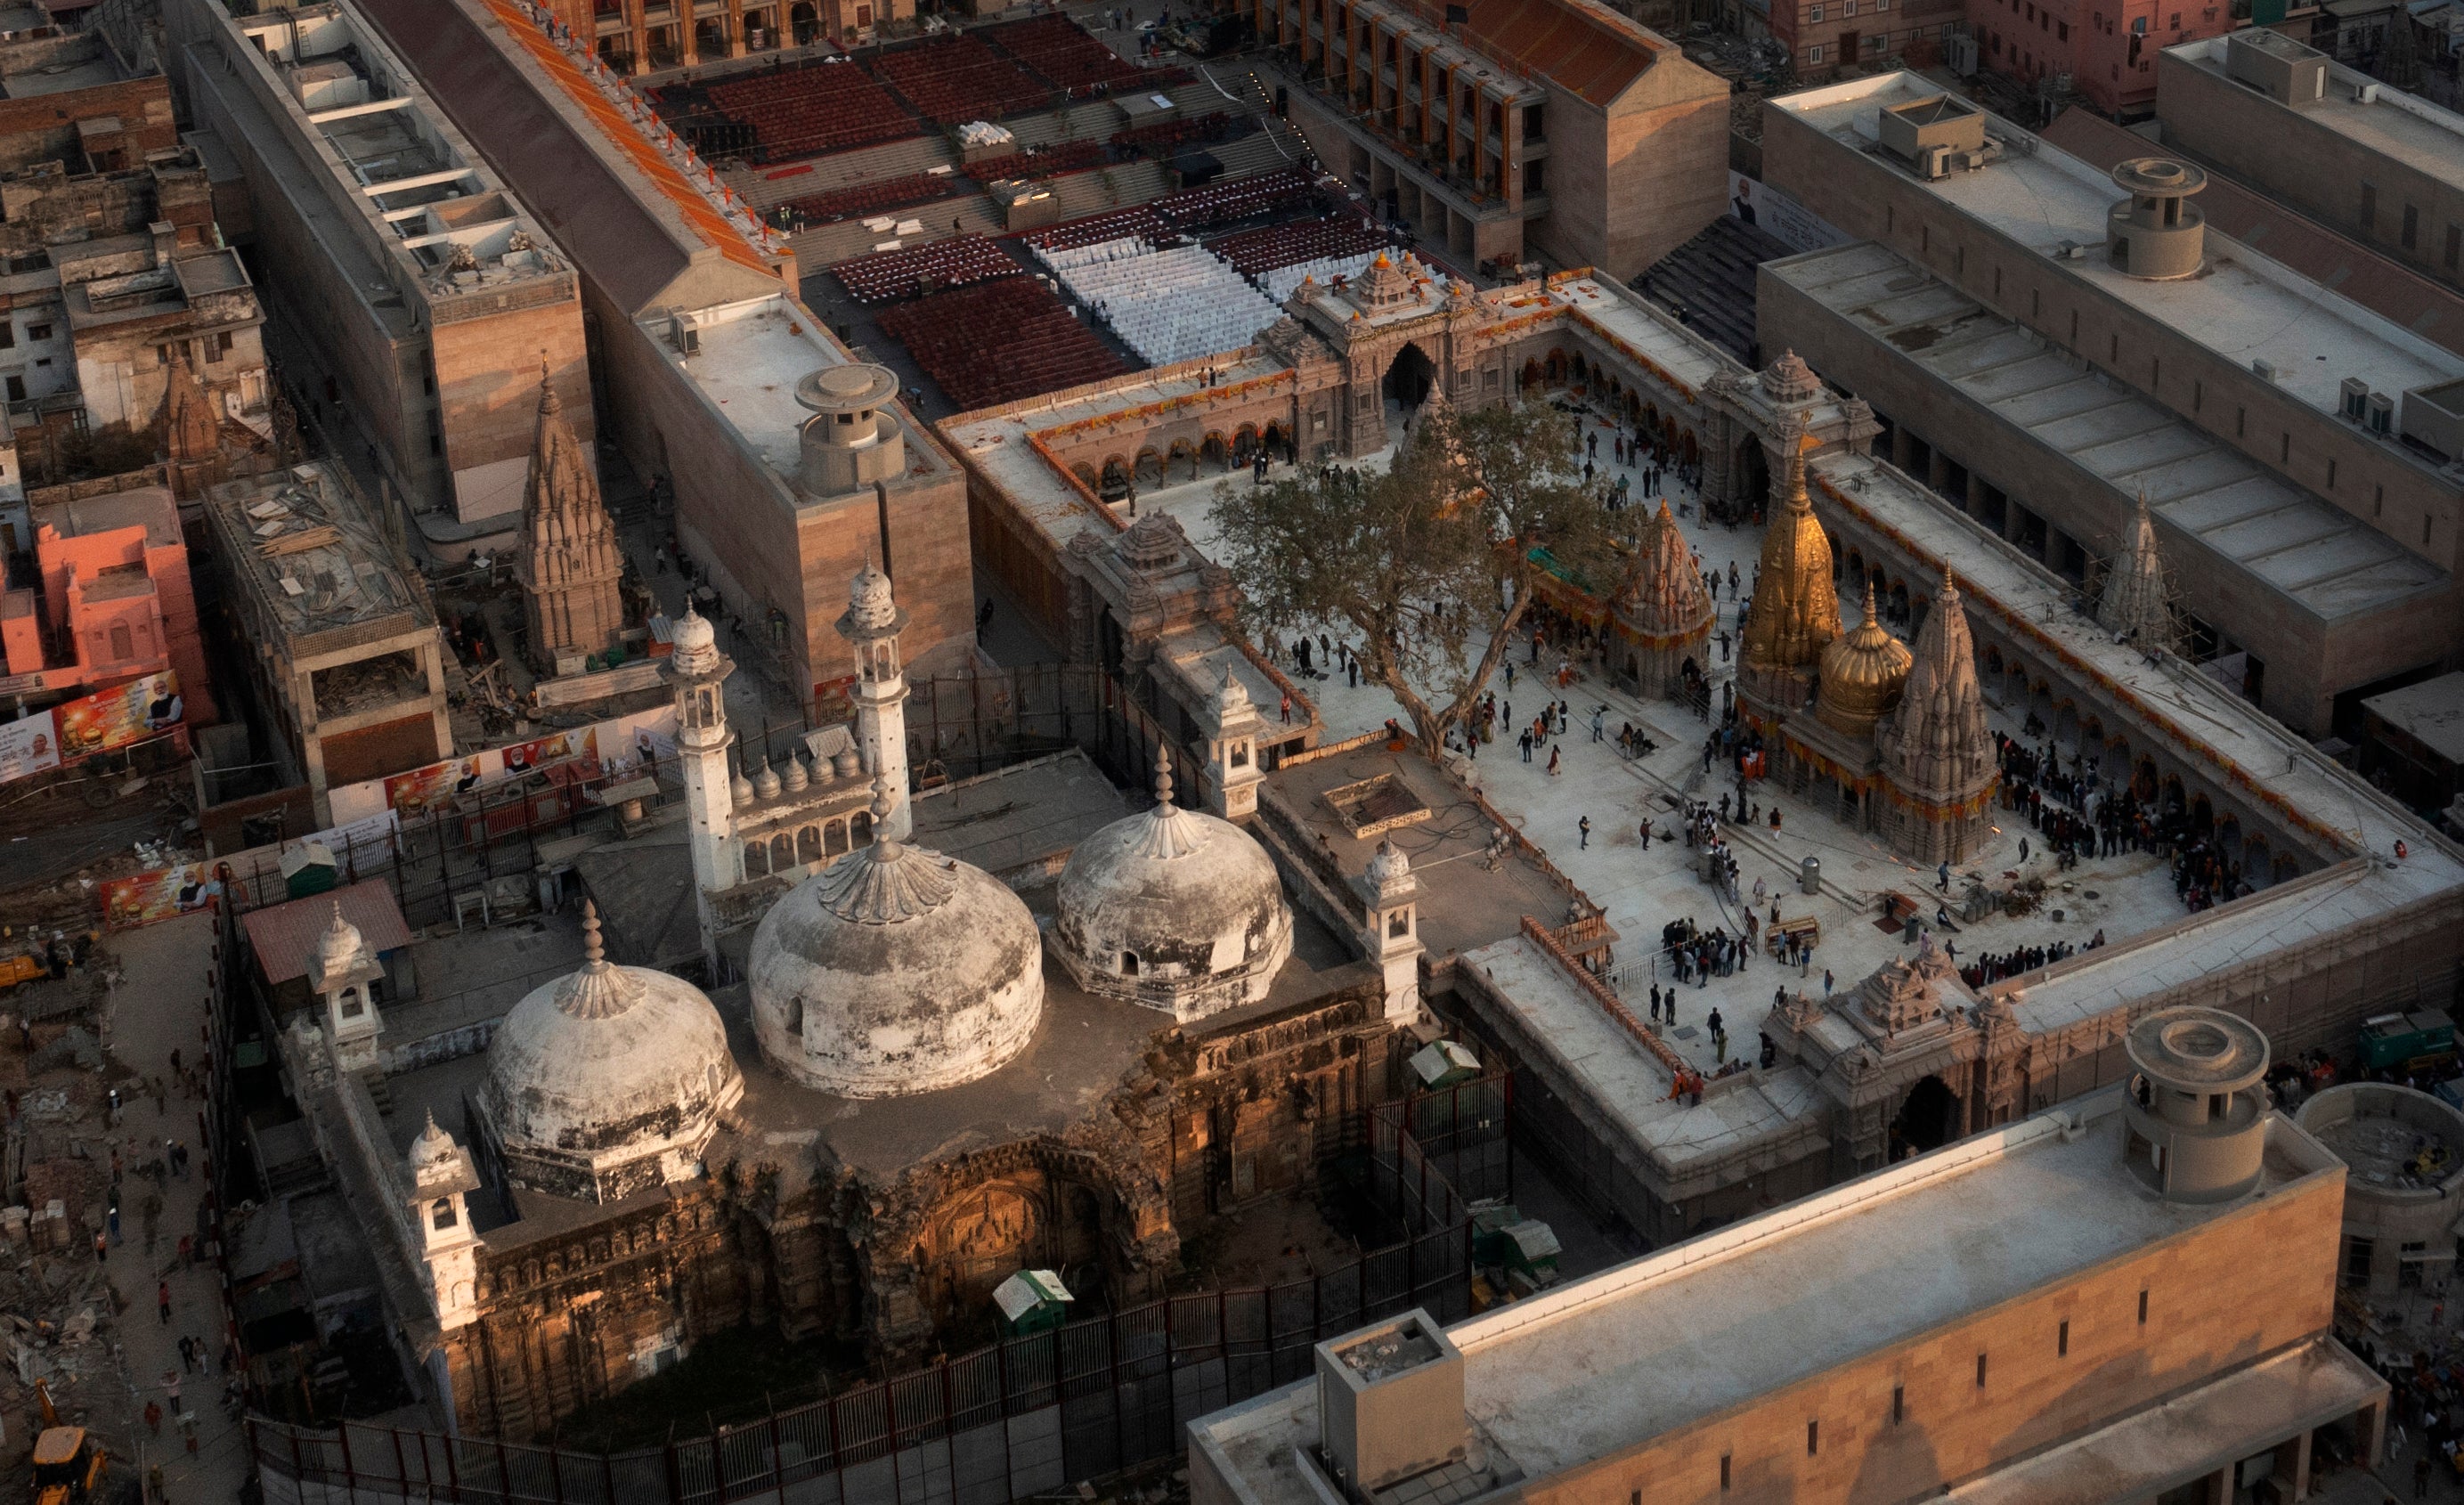 An aerial view shows Gyanvapi mosque, left, and Kashiviswanath temple on the banks of the river Ganges in Varanasi